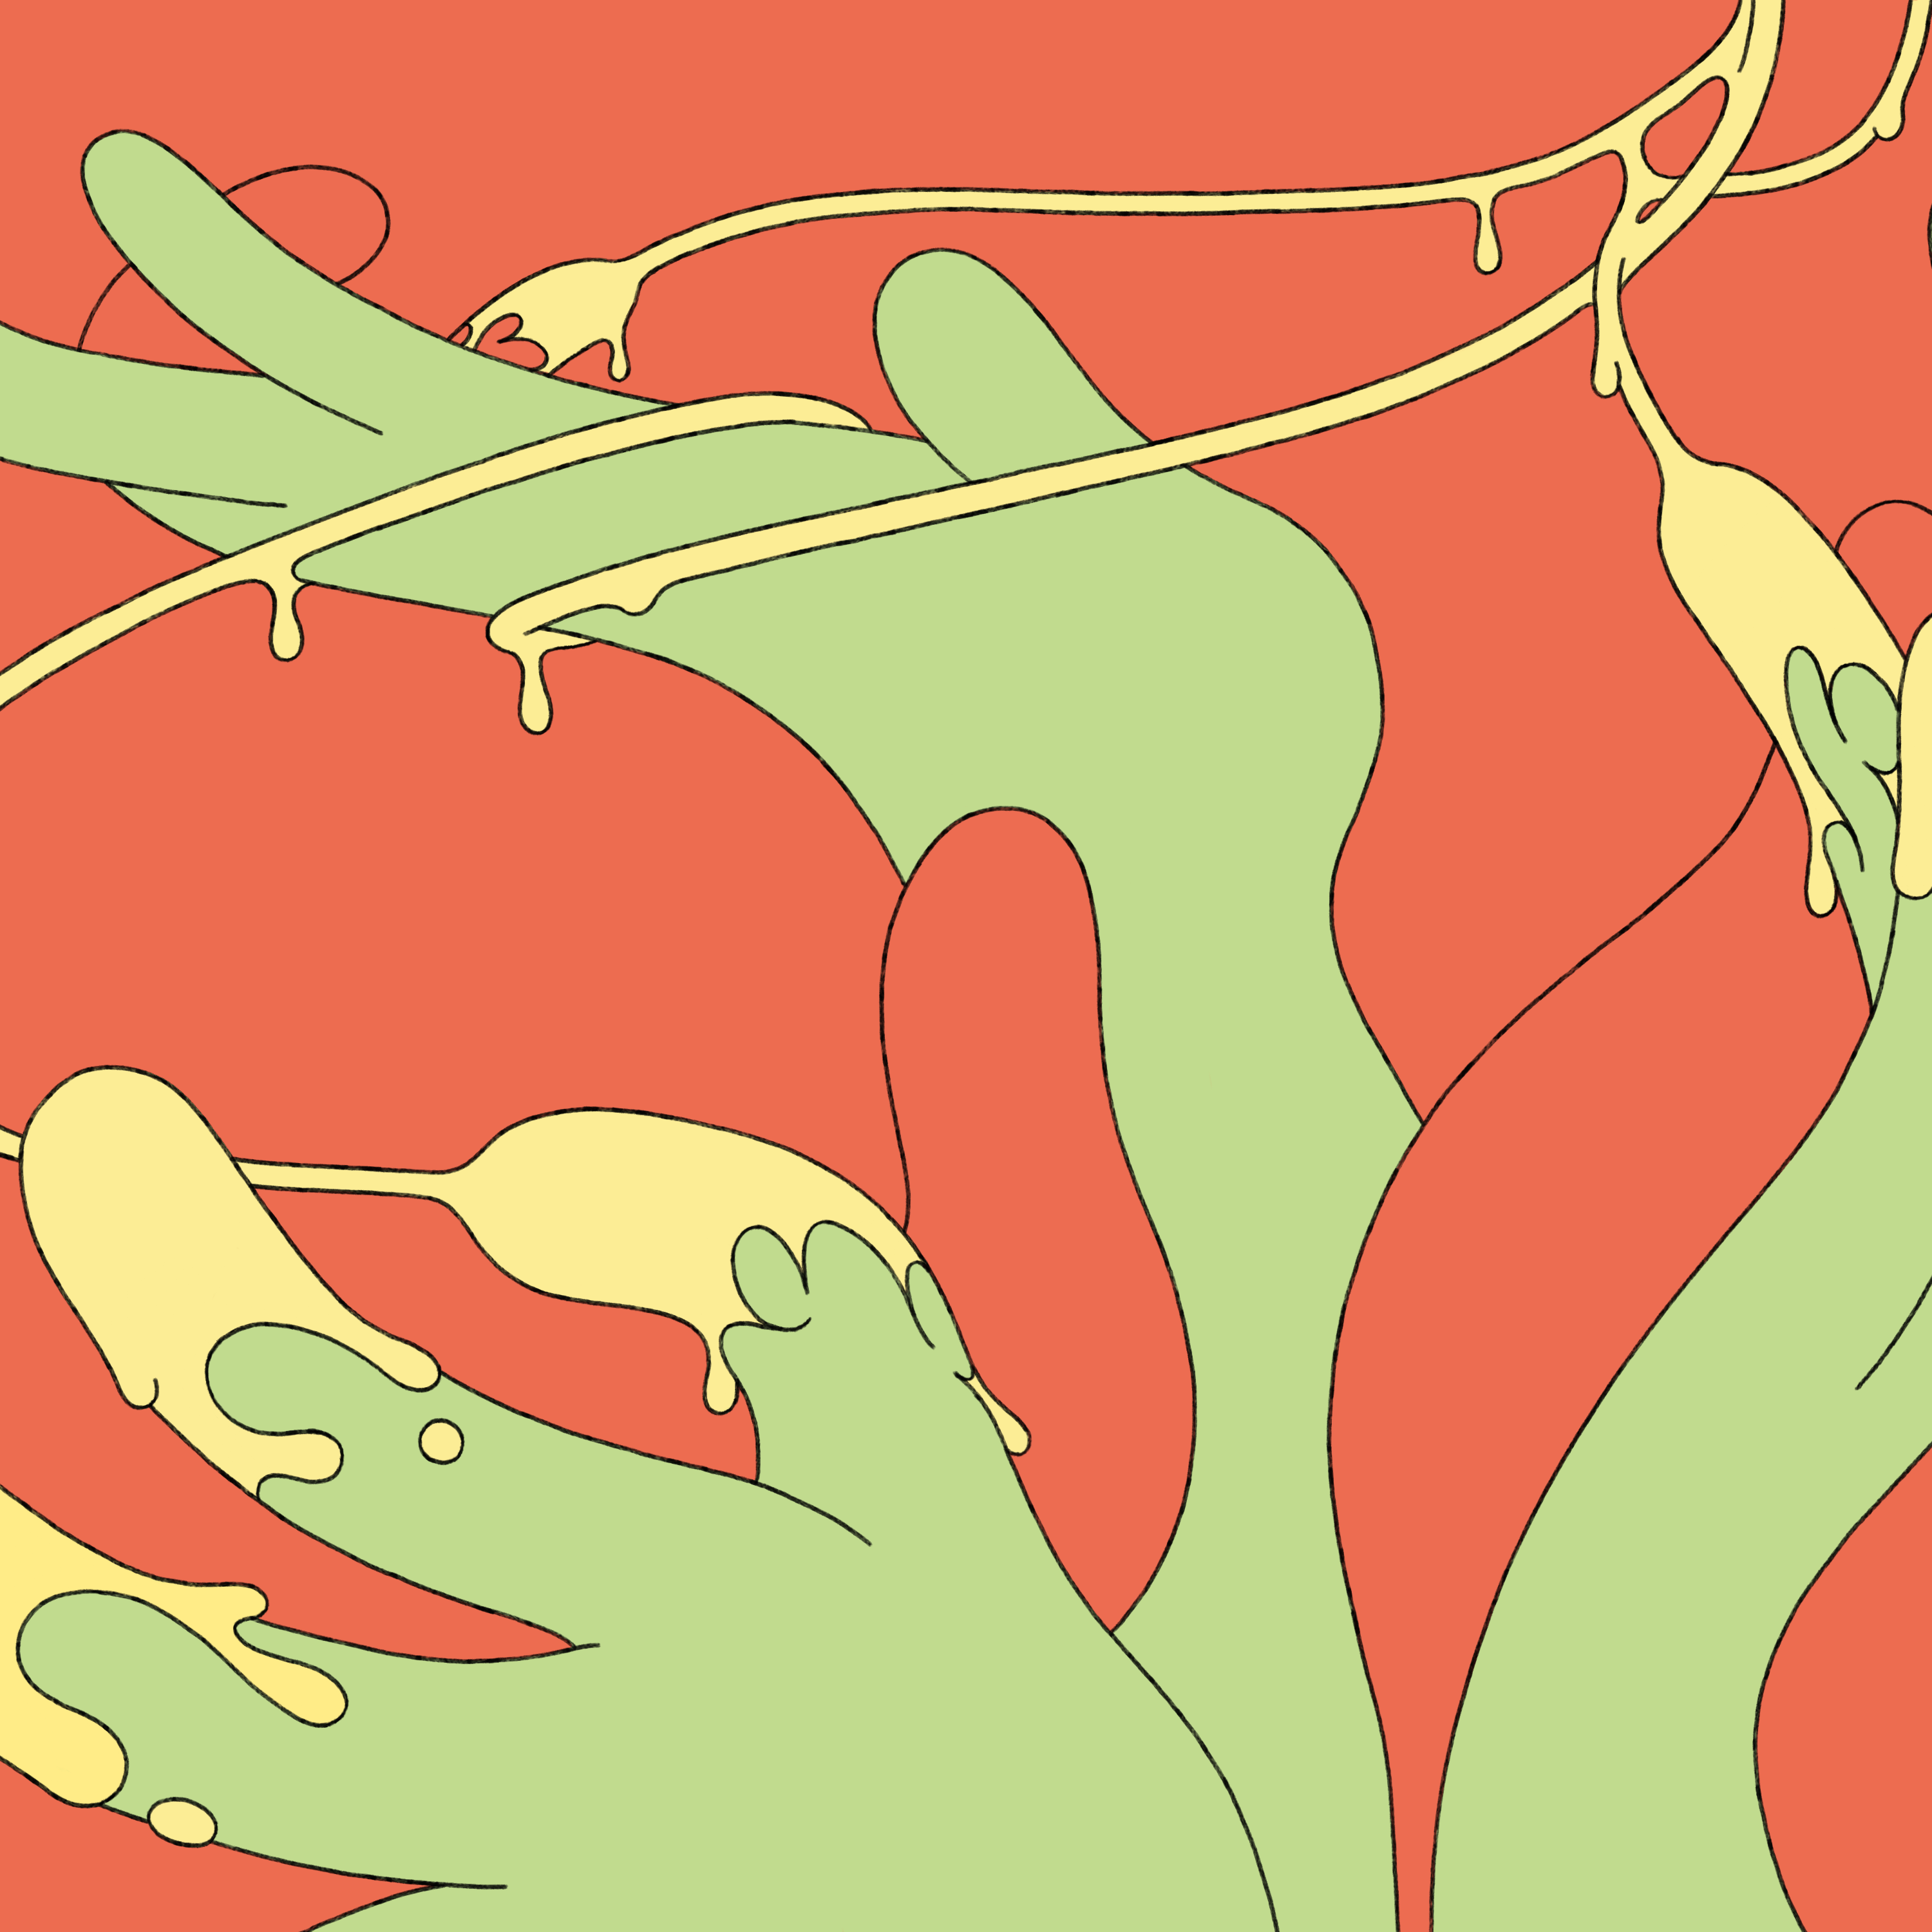 Three cartoon green hands on a red background. Some of their fingertips dripped in yellow slime, the slime is stringy like cheese.